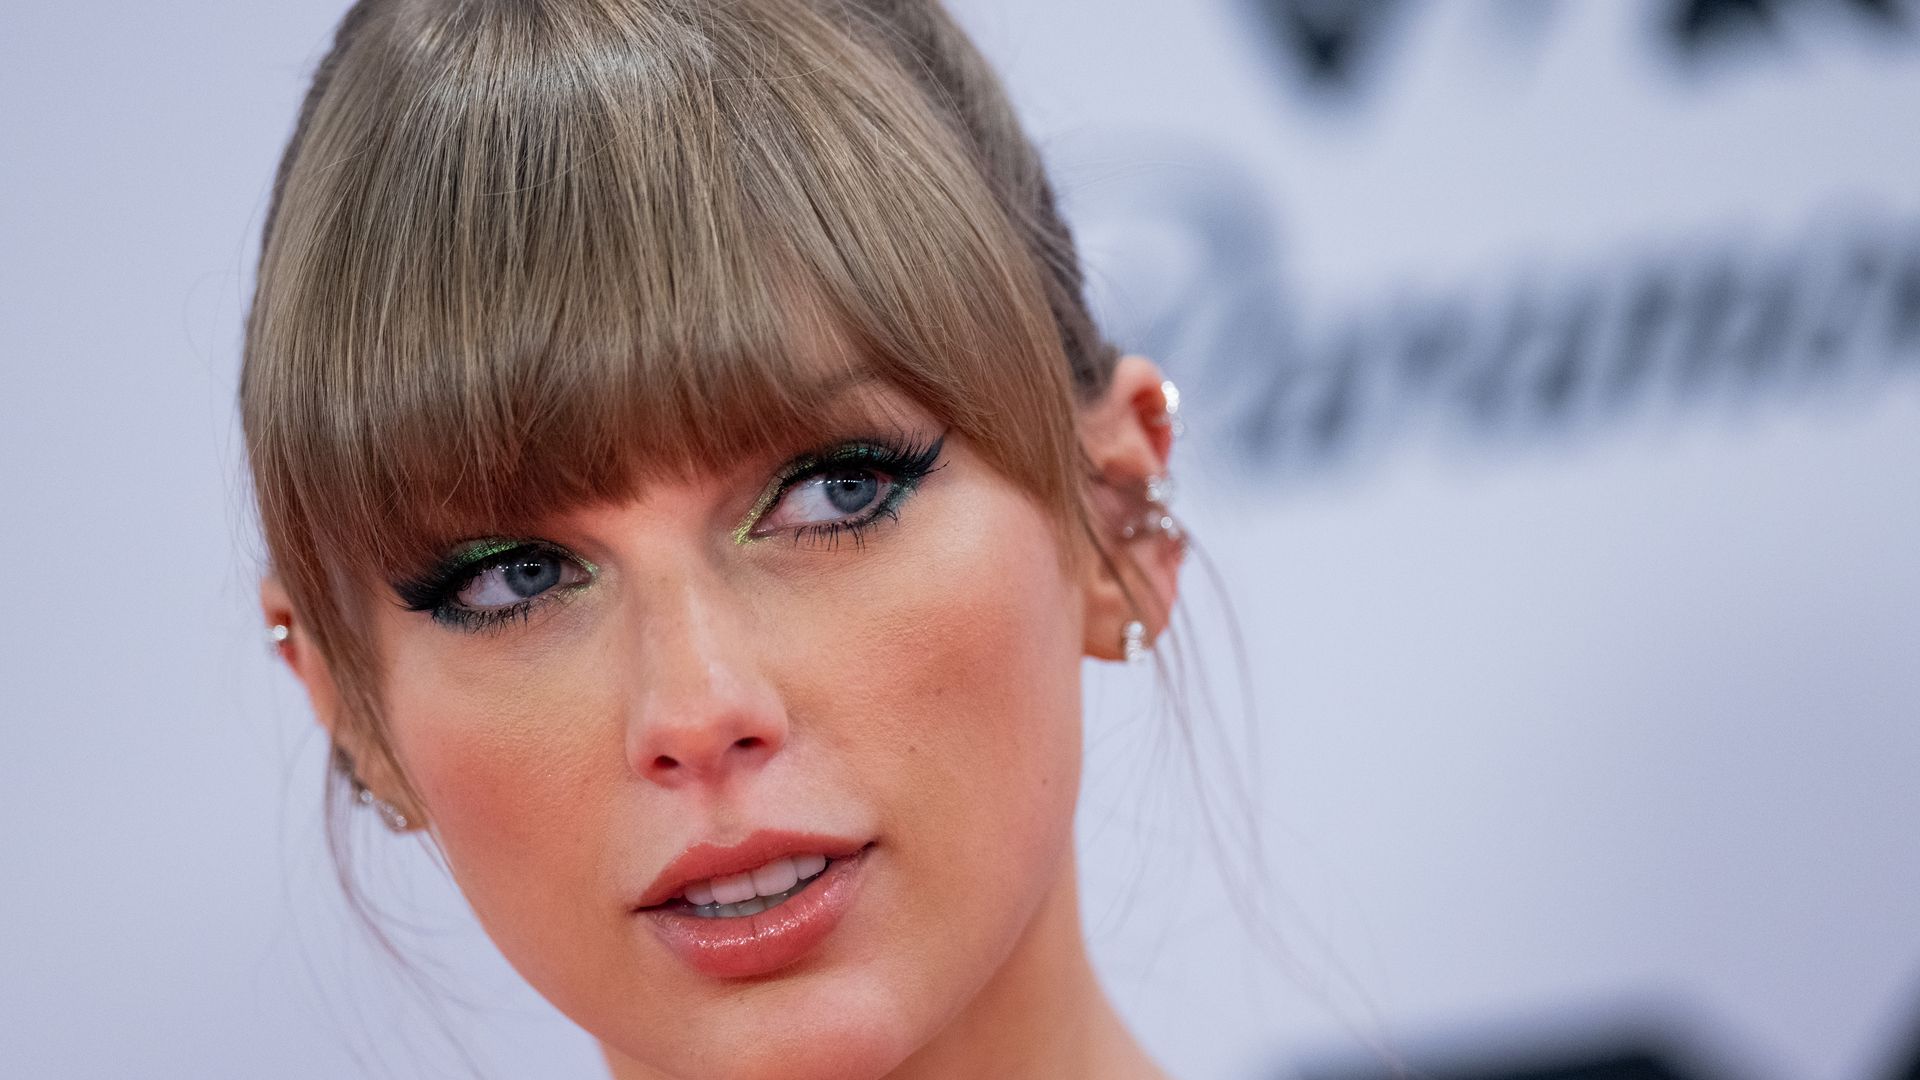 The new album by US singer Taylor Swift is breaking all records.